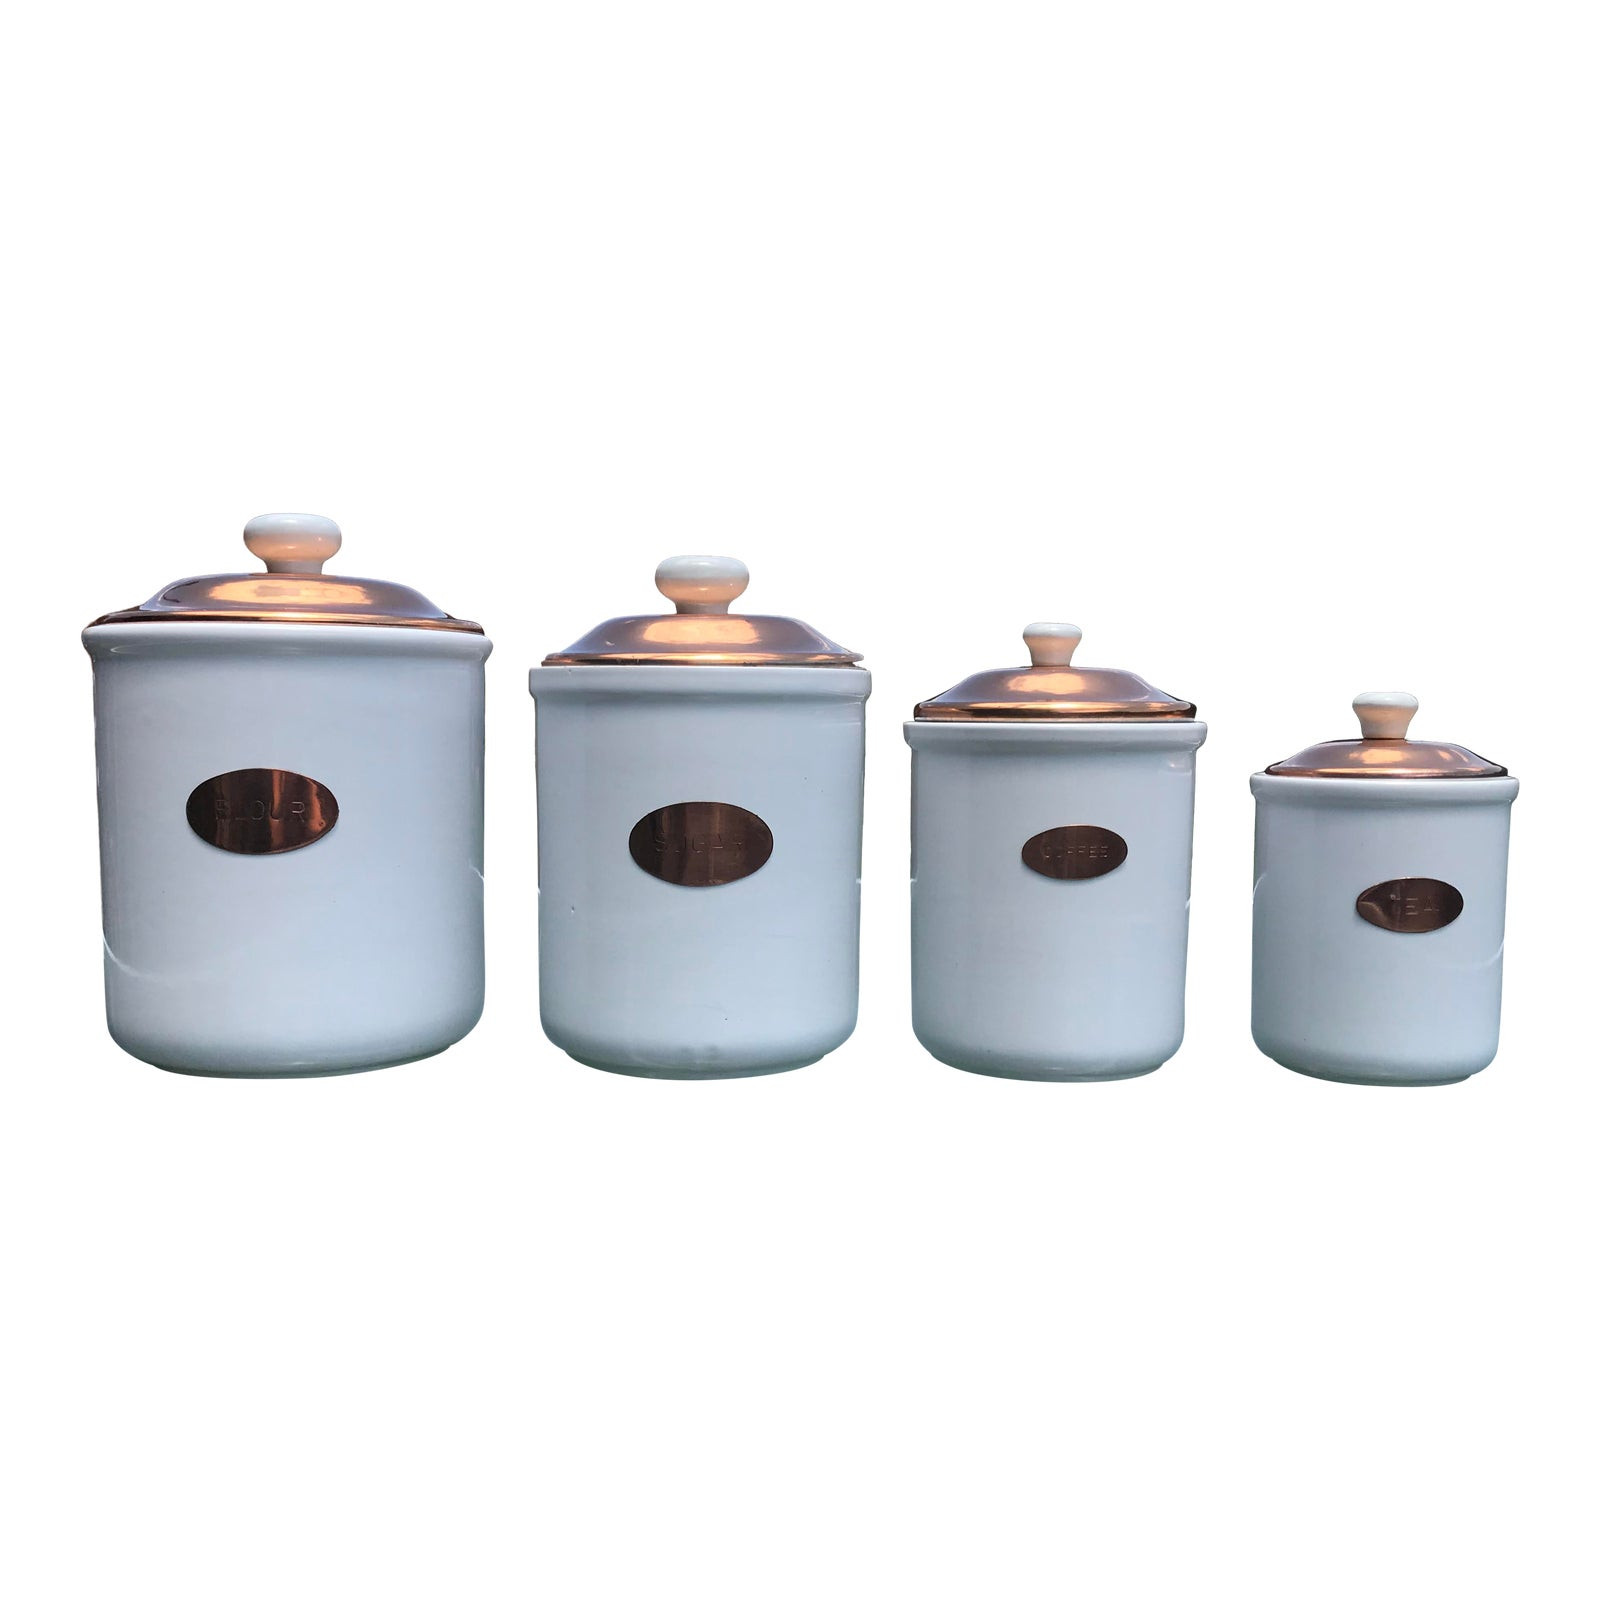 White Kitchen Canisters
 Vintage White Ceramic & Copper Kitchen Canisters With Lids